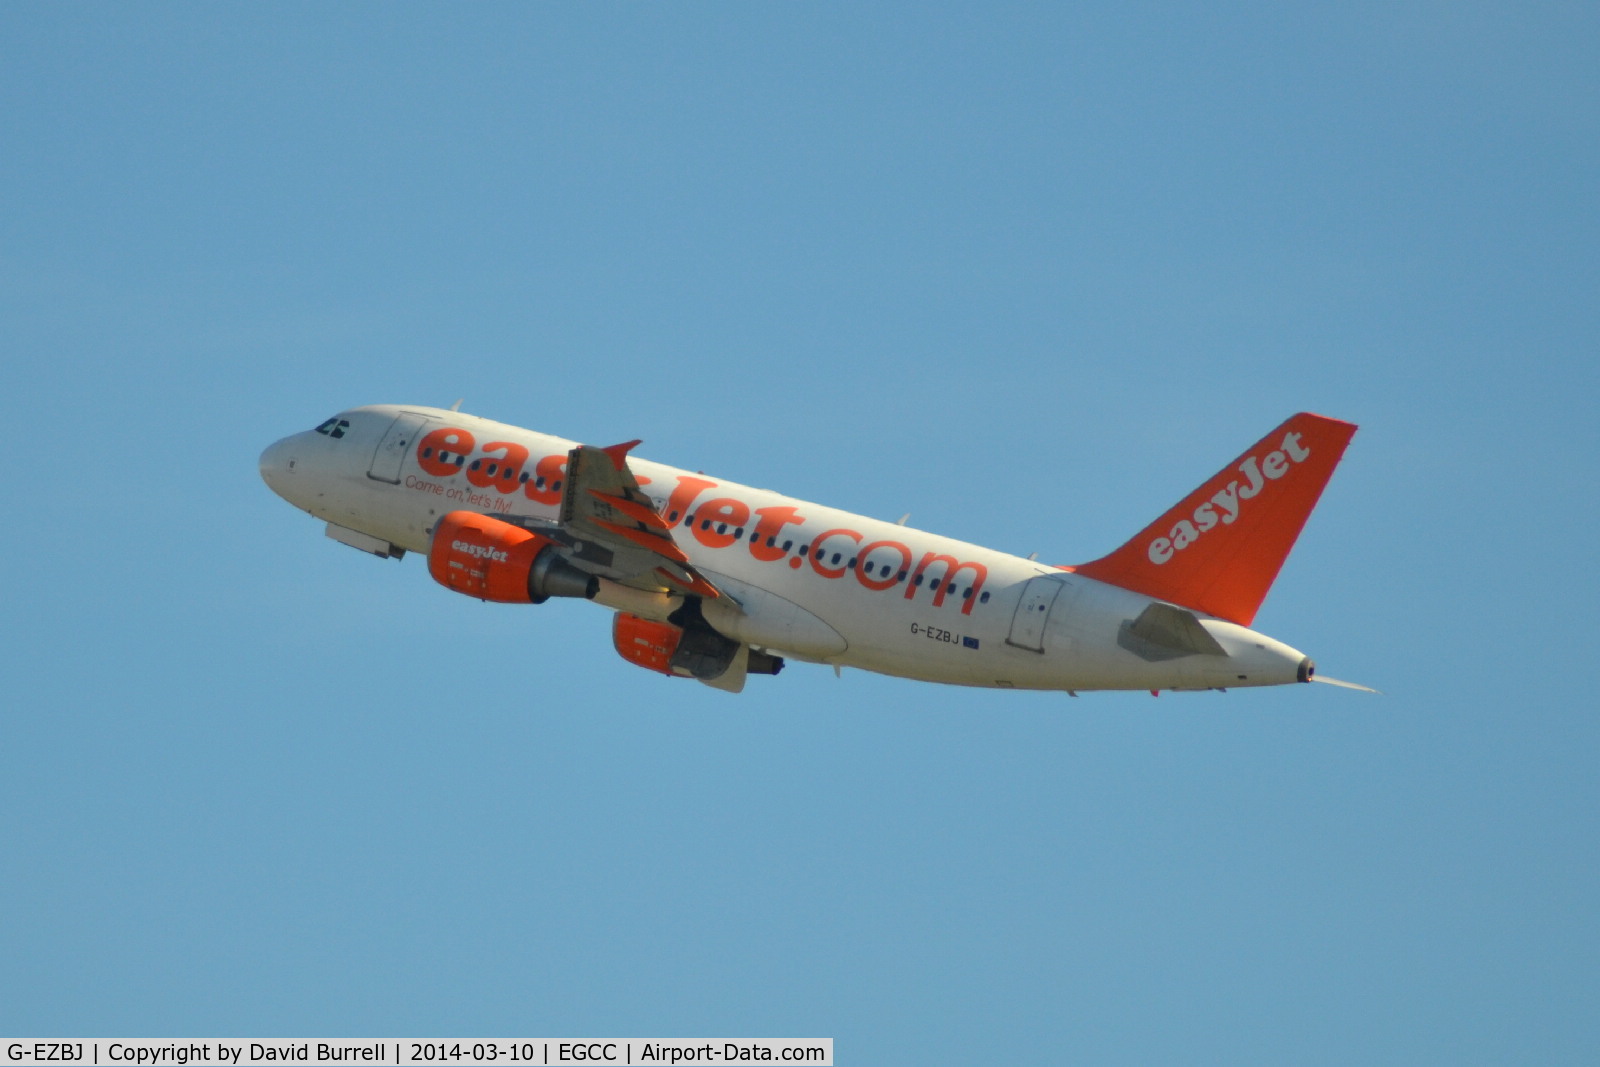 G-EZBJ, 2007 Airbus A319-111 C/N 3036, Easyjet Airbus A319-111 taking off from Manchester Airport.